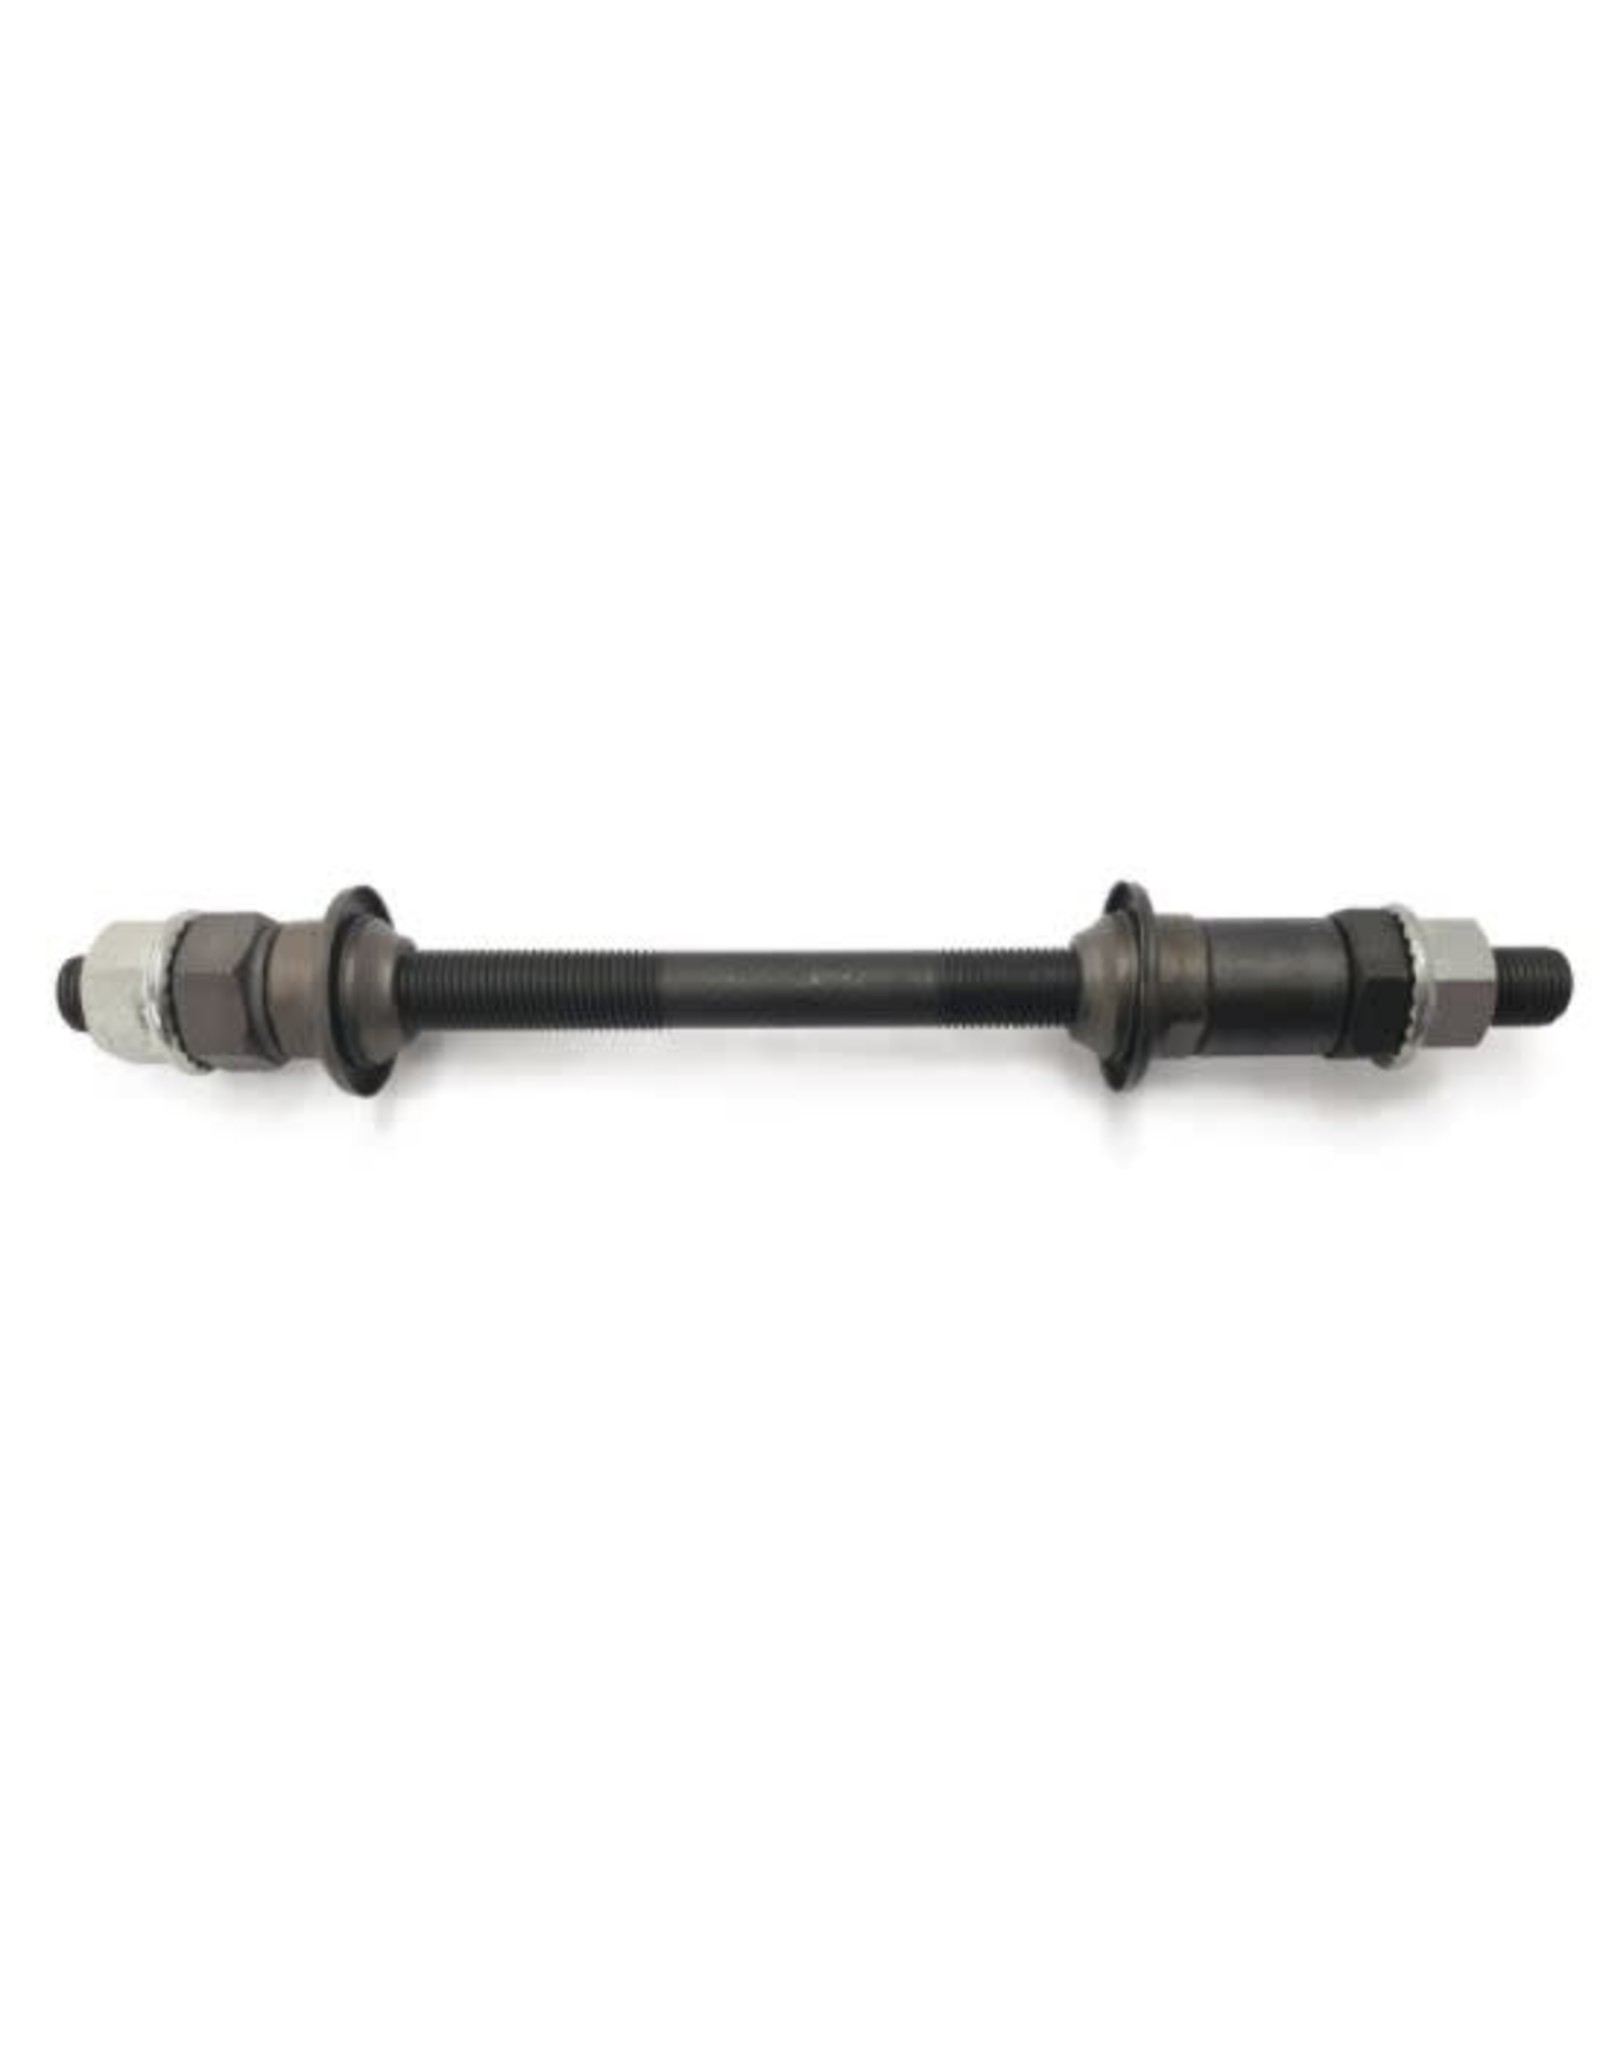 DAMCO 12 SPEED REAR AXLE